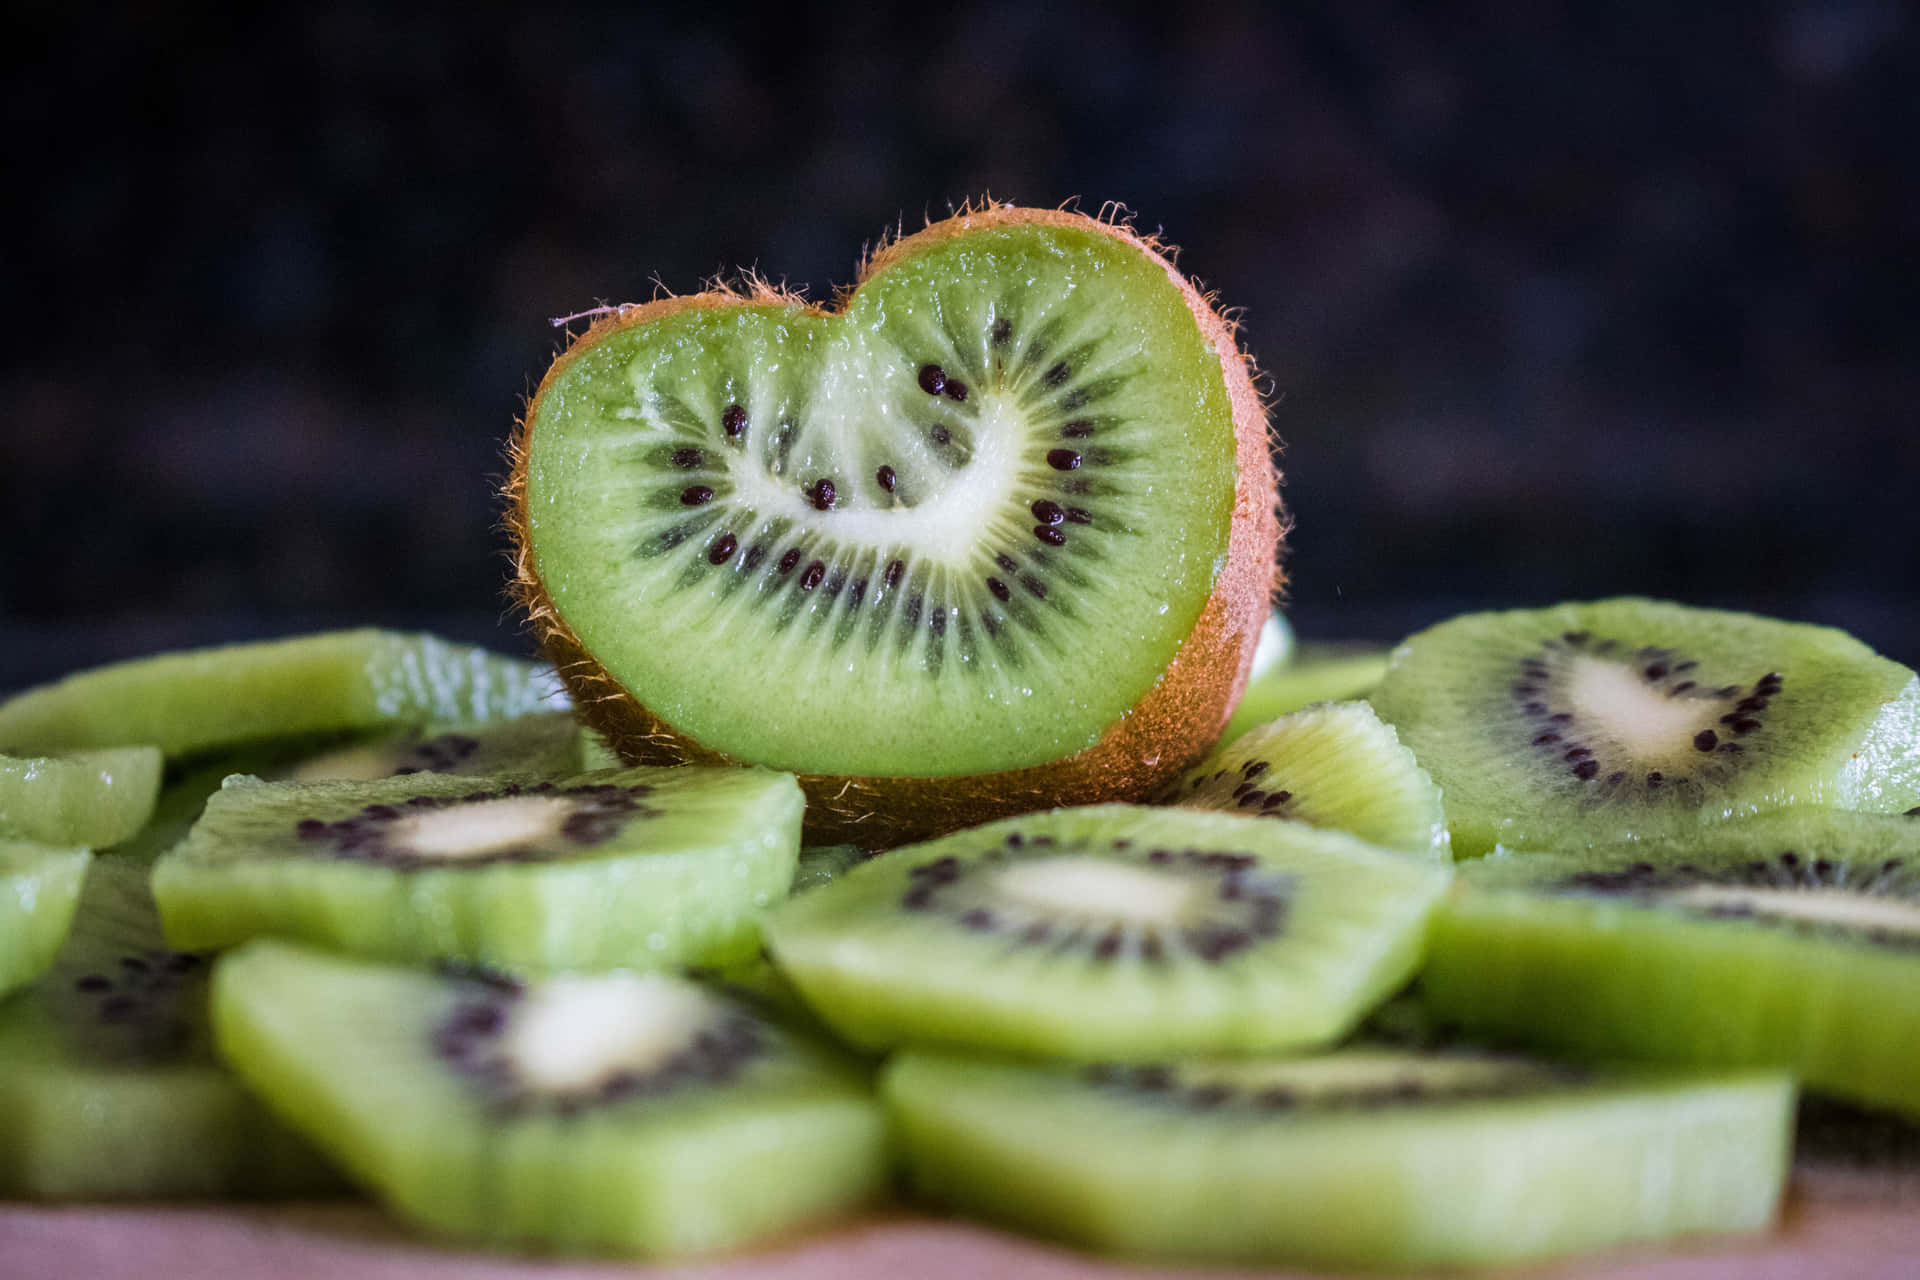 Close-up of a Kiwi fruit on a solid background